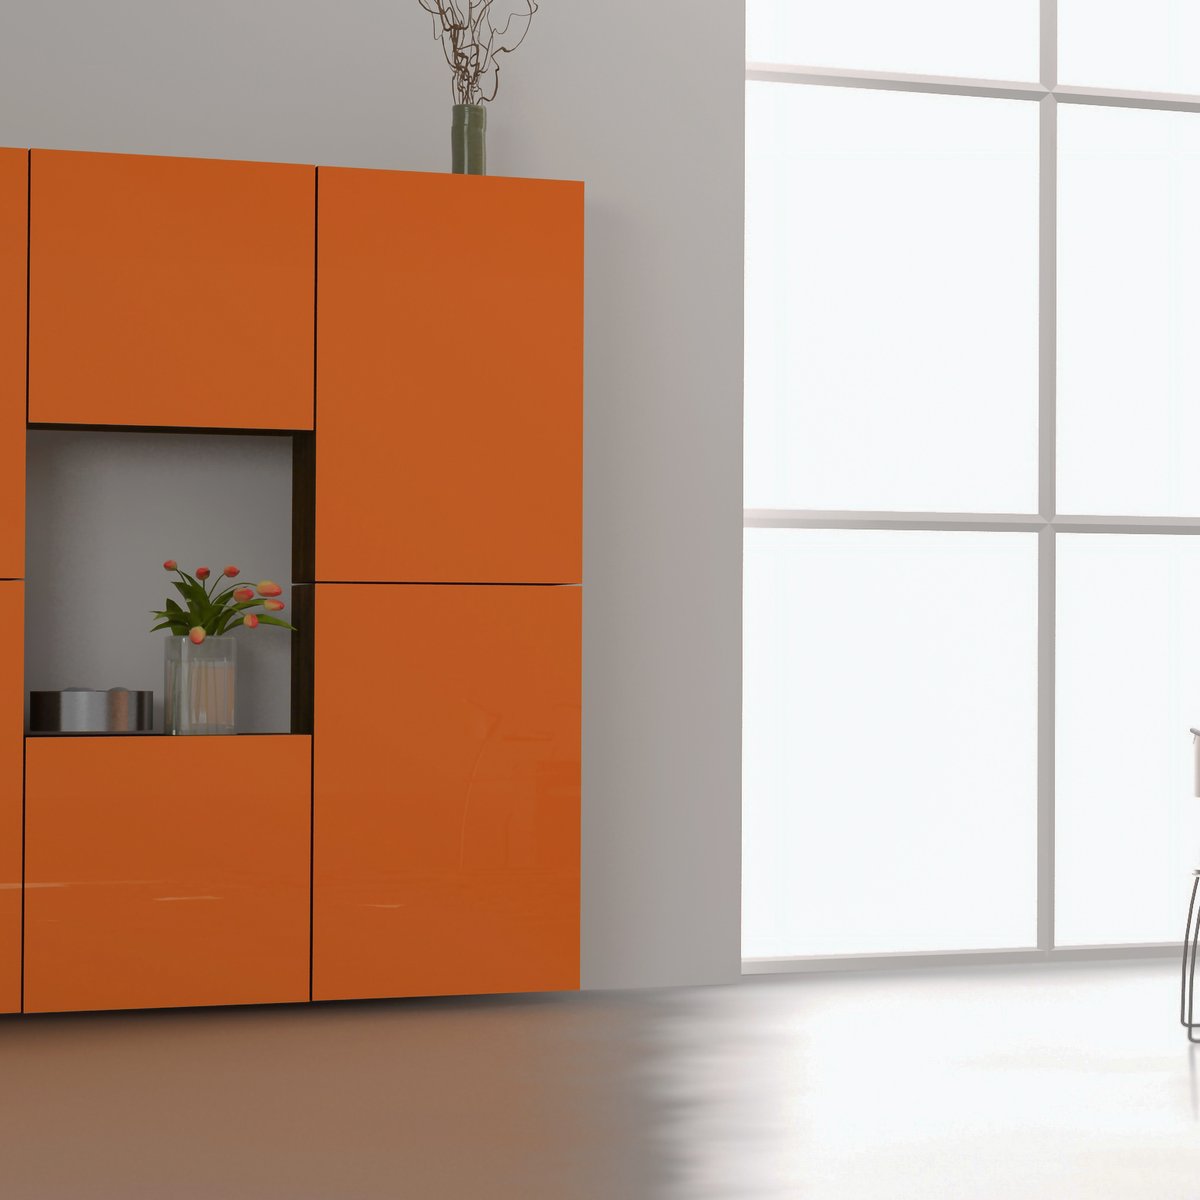 A pop of colour just in time for the sunny weather.

#neonorange #orangehome #orangefurniture #brighthome #colourfulhome #livingspace #modernhome #colourfulfurniture #houseinspo #bespoke